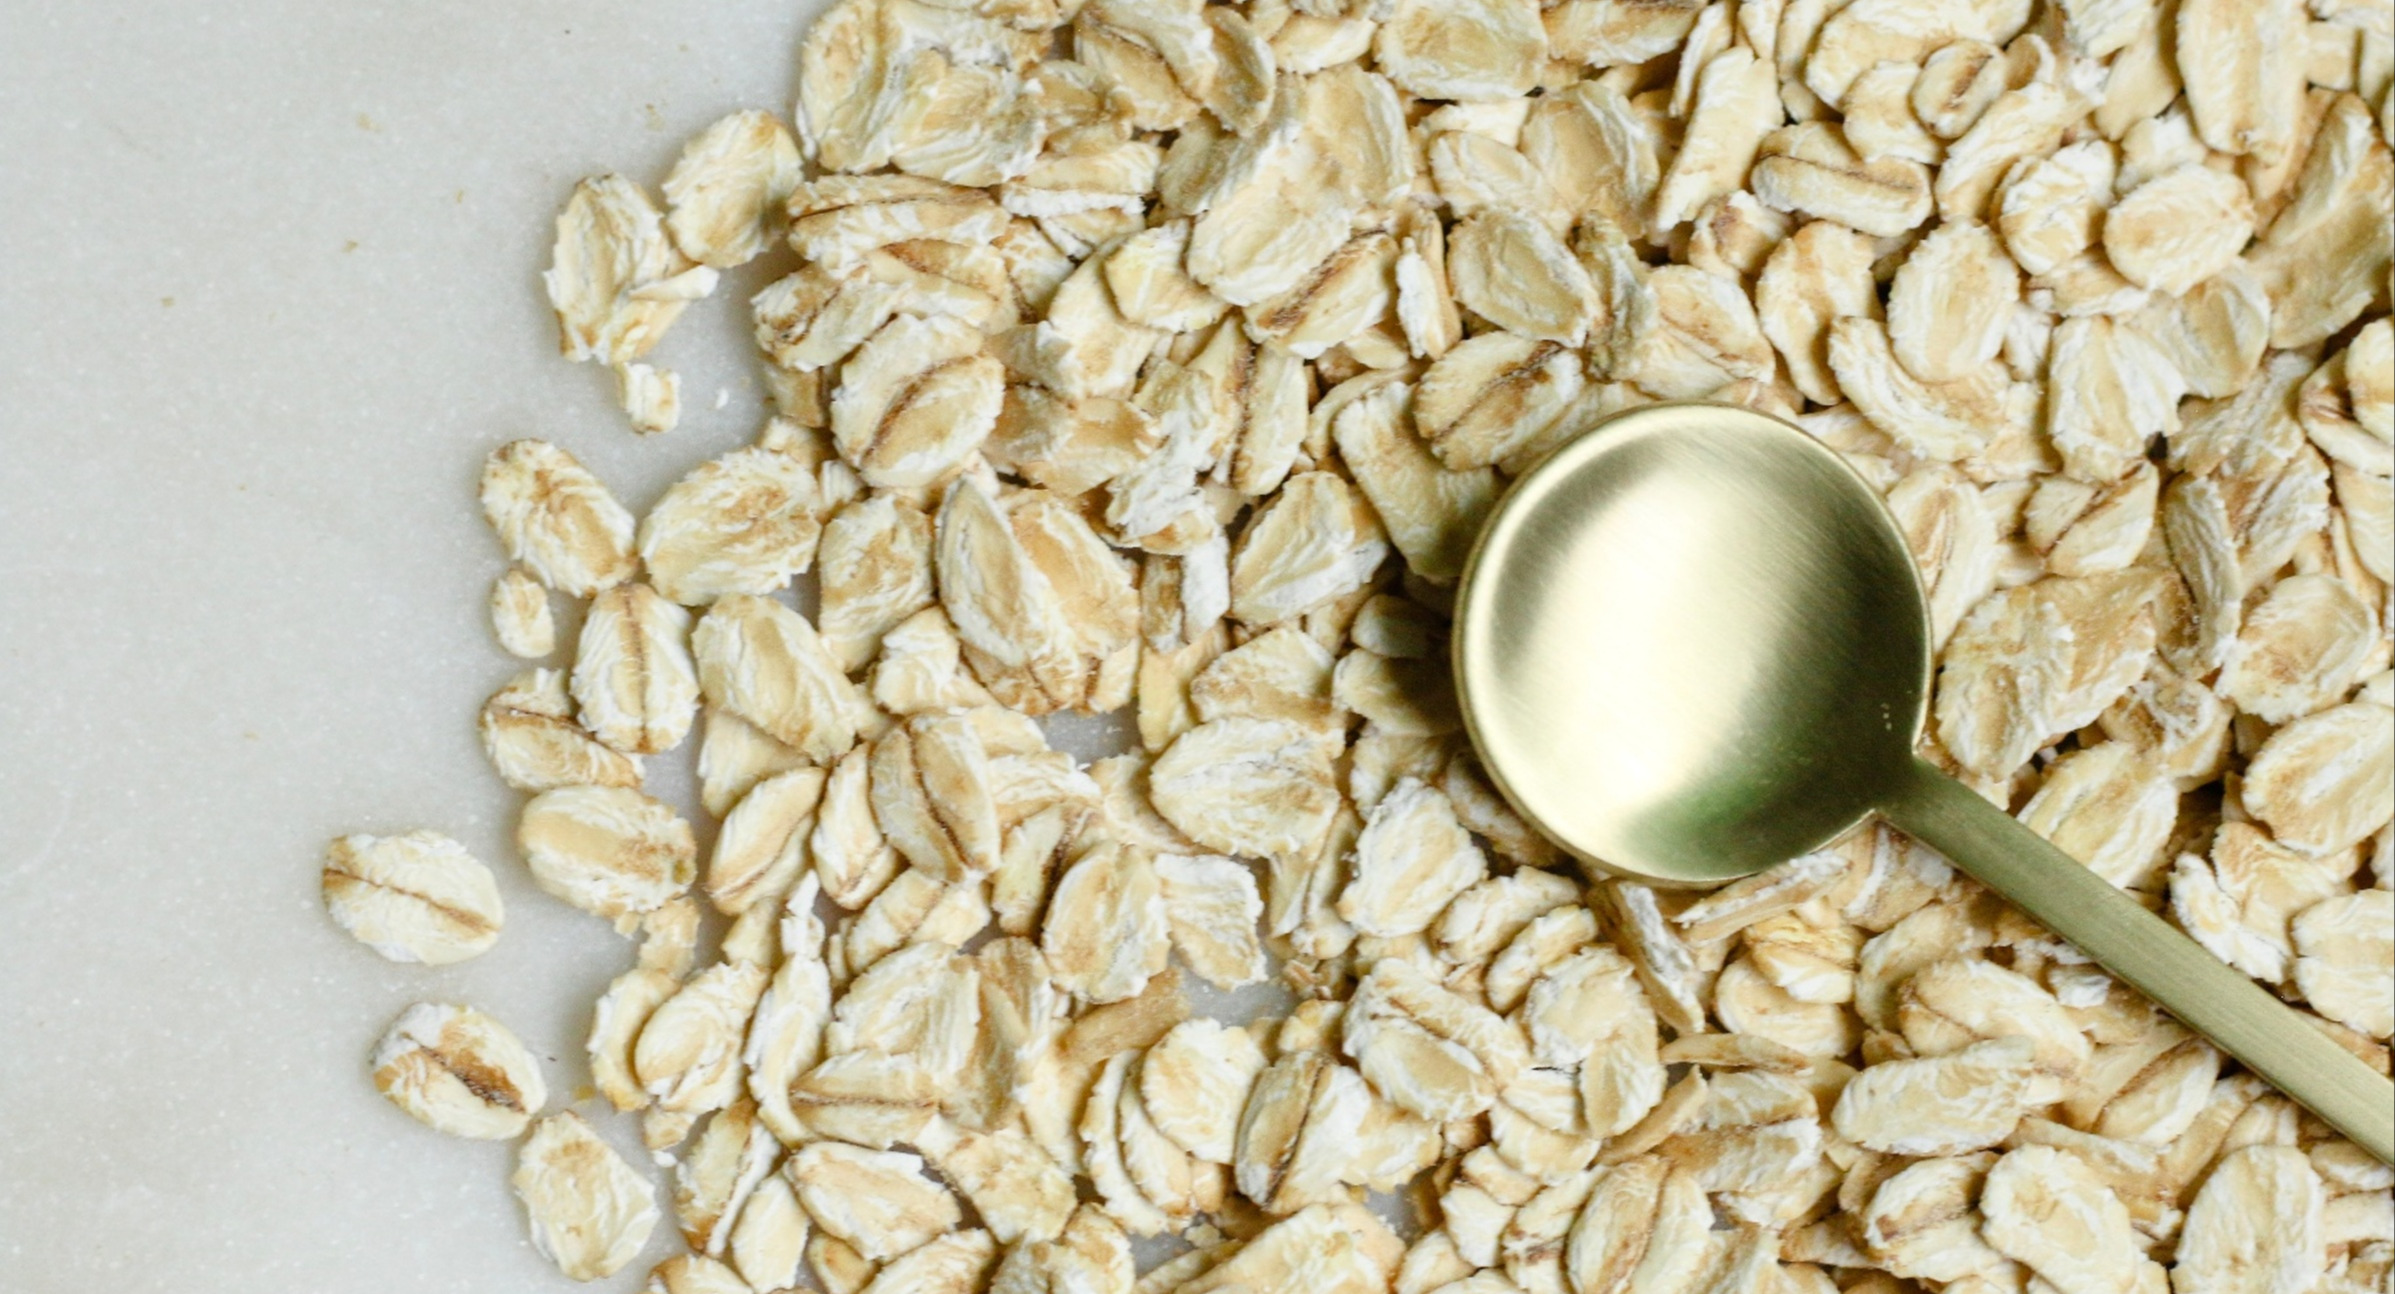 Alt: Rolled oats and a small spoon up close on a table. Image courtesy of Unsplash, by Melissa Di Rocco.